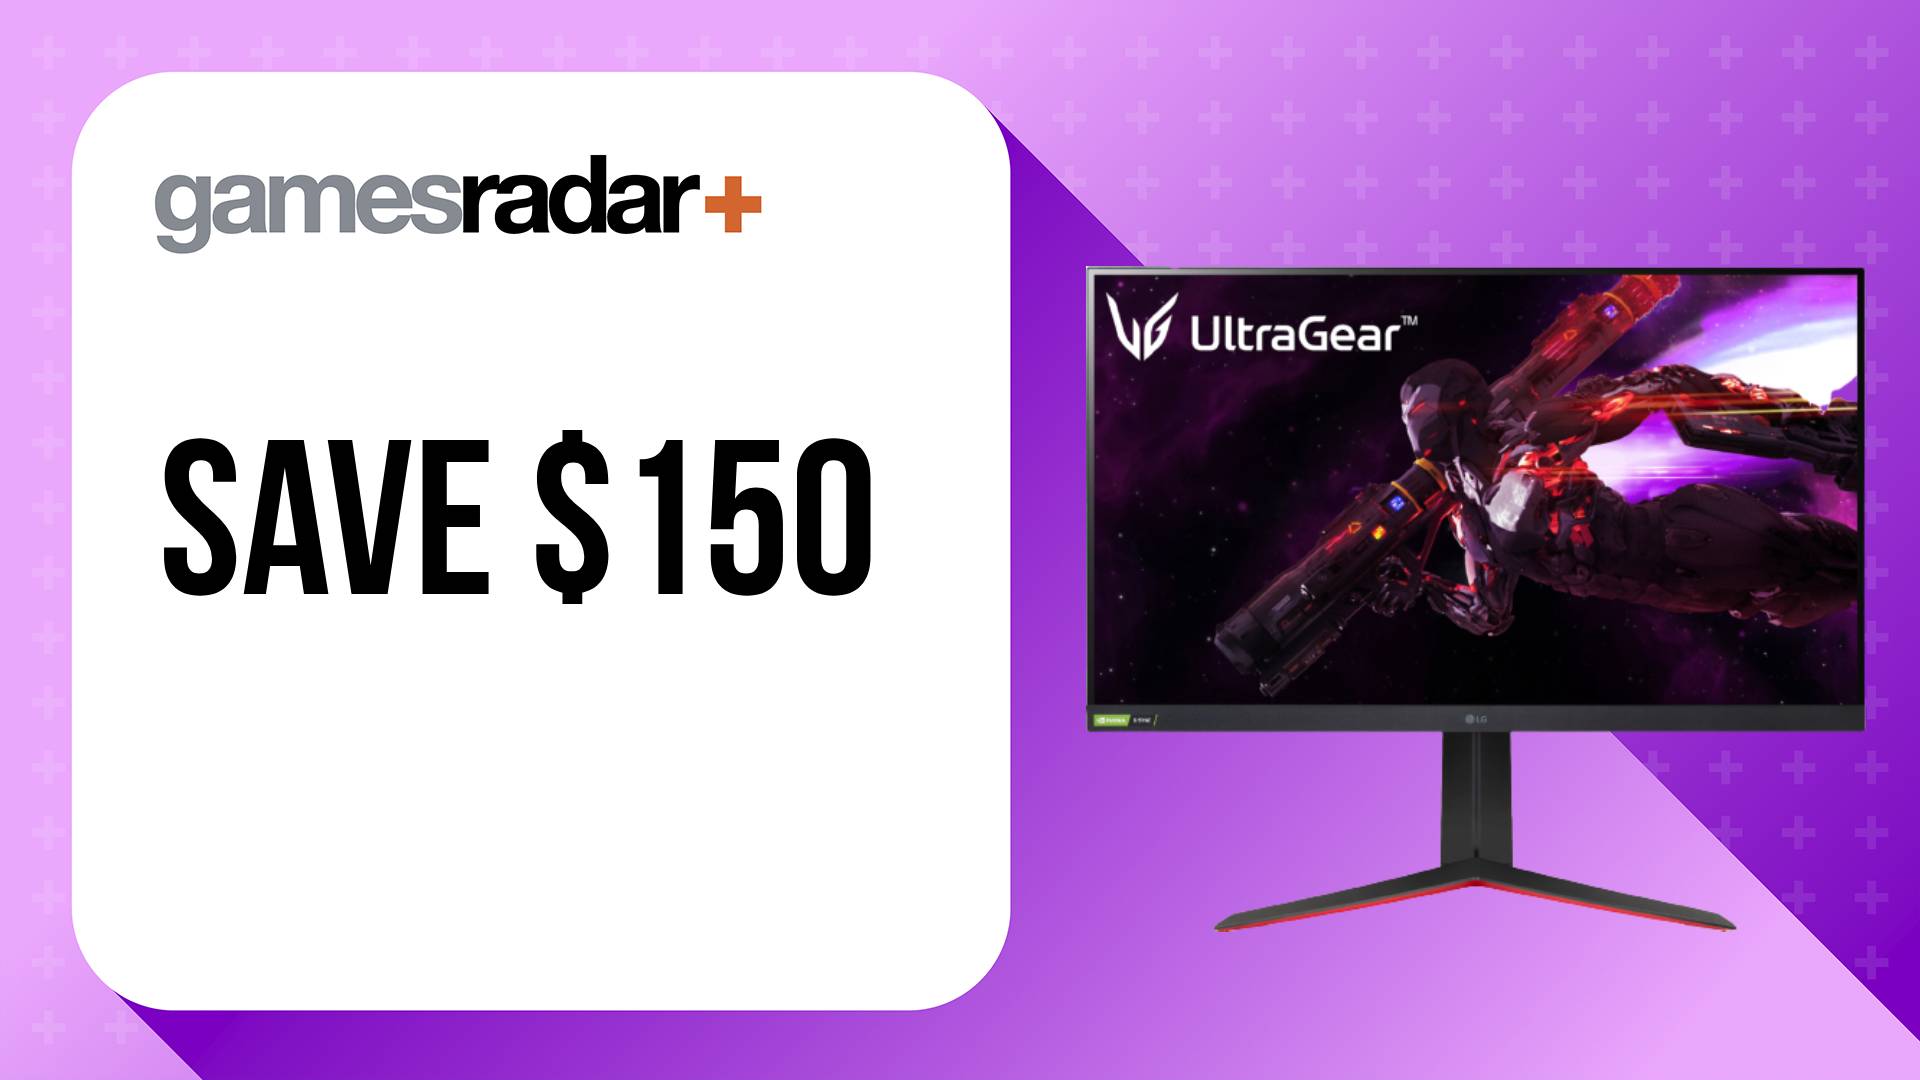 LG Black Friday Gaming Monitor Offers